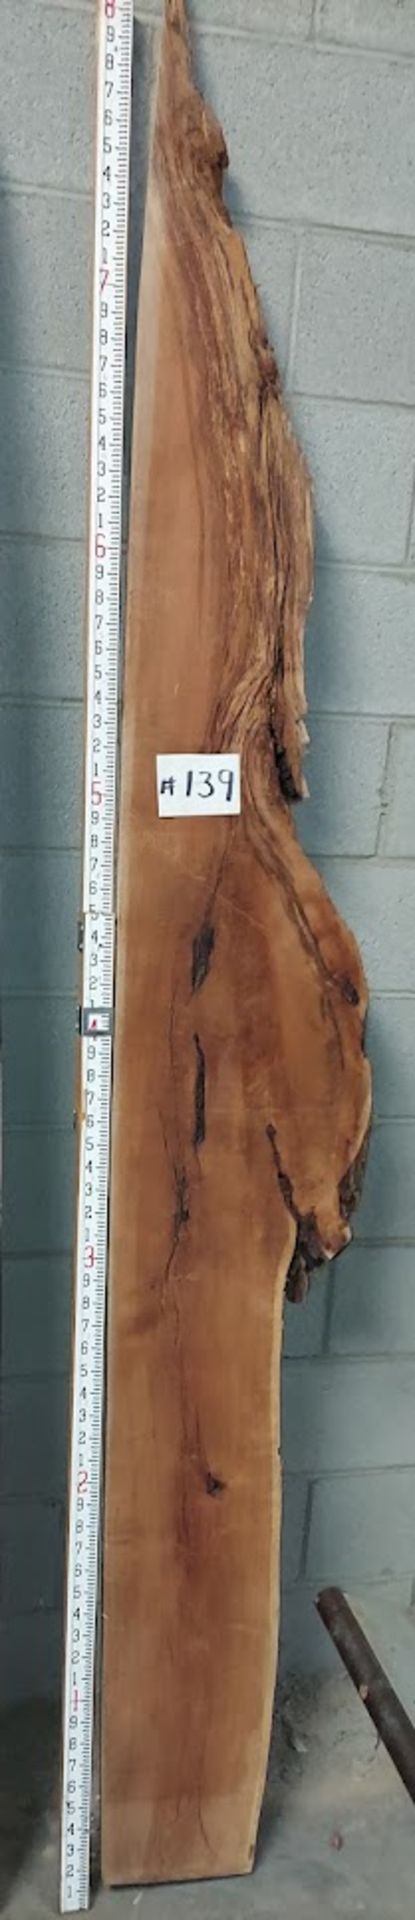 Mesquite Hardwood Lumber Slab, Size is approx. 95" x 9" - 14" x 2" Thick (Book Matched 138)